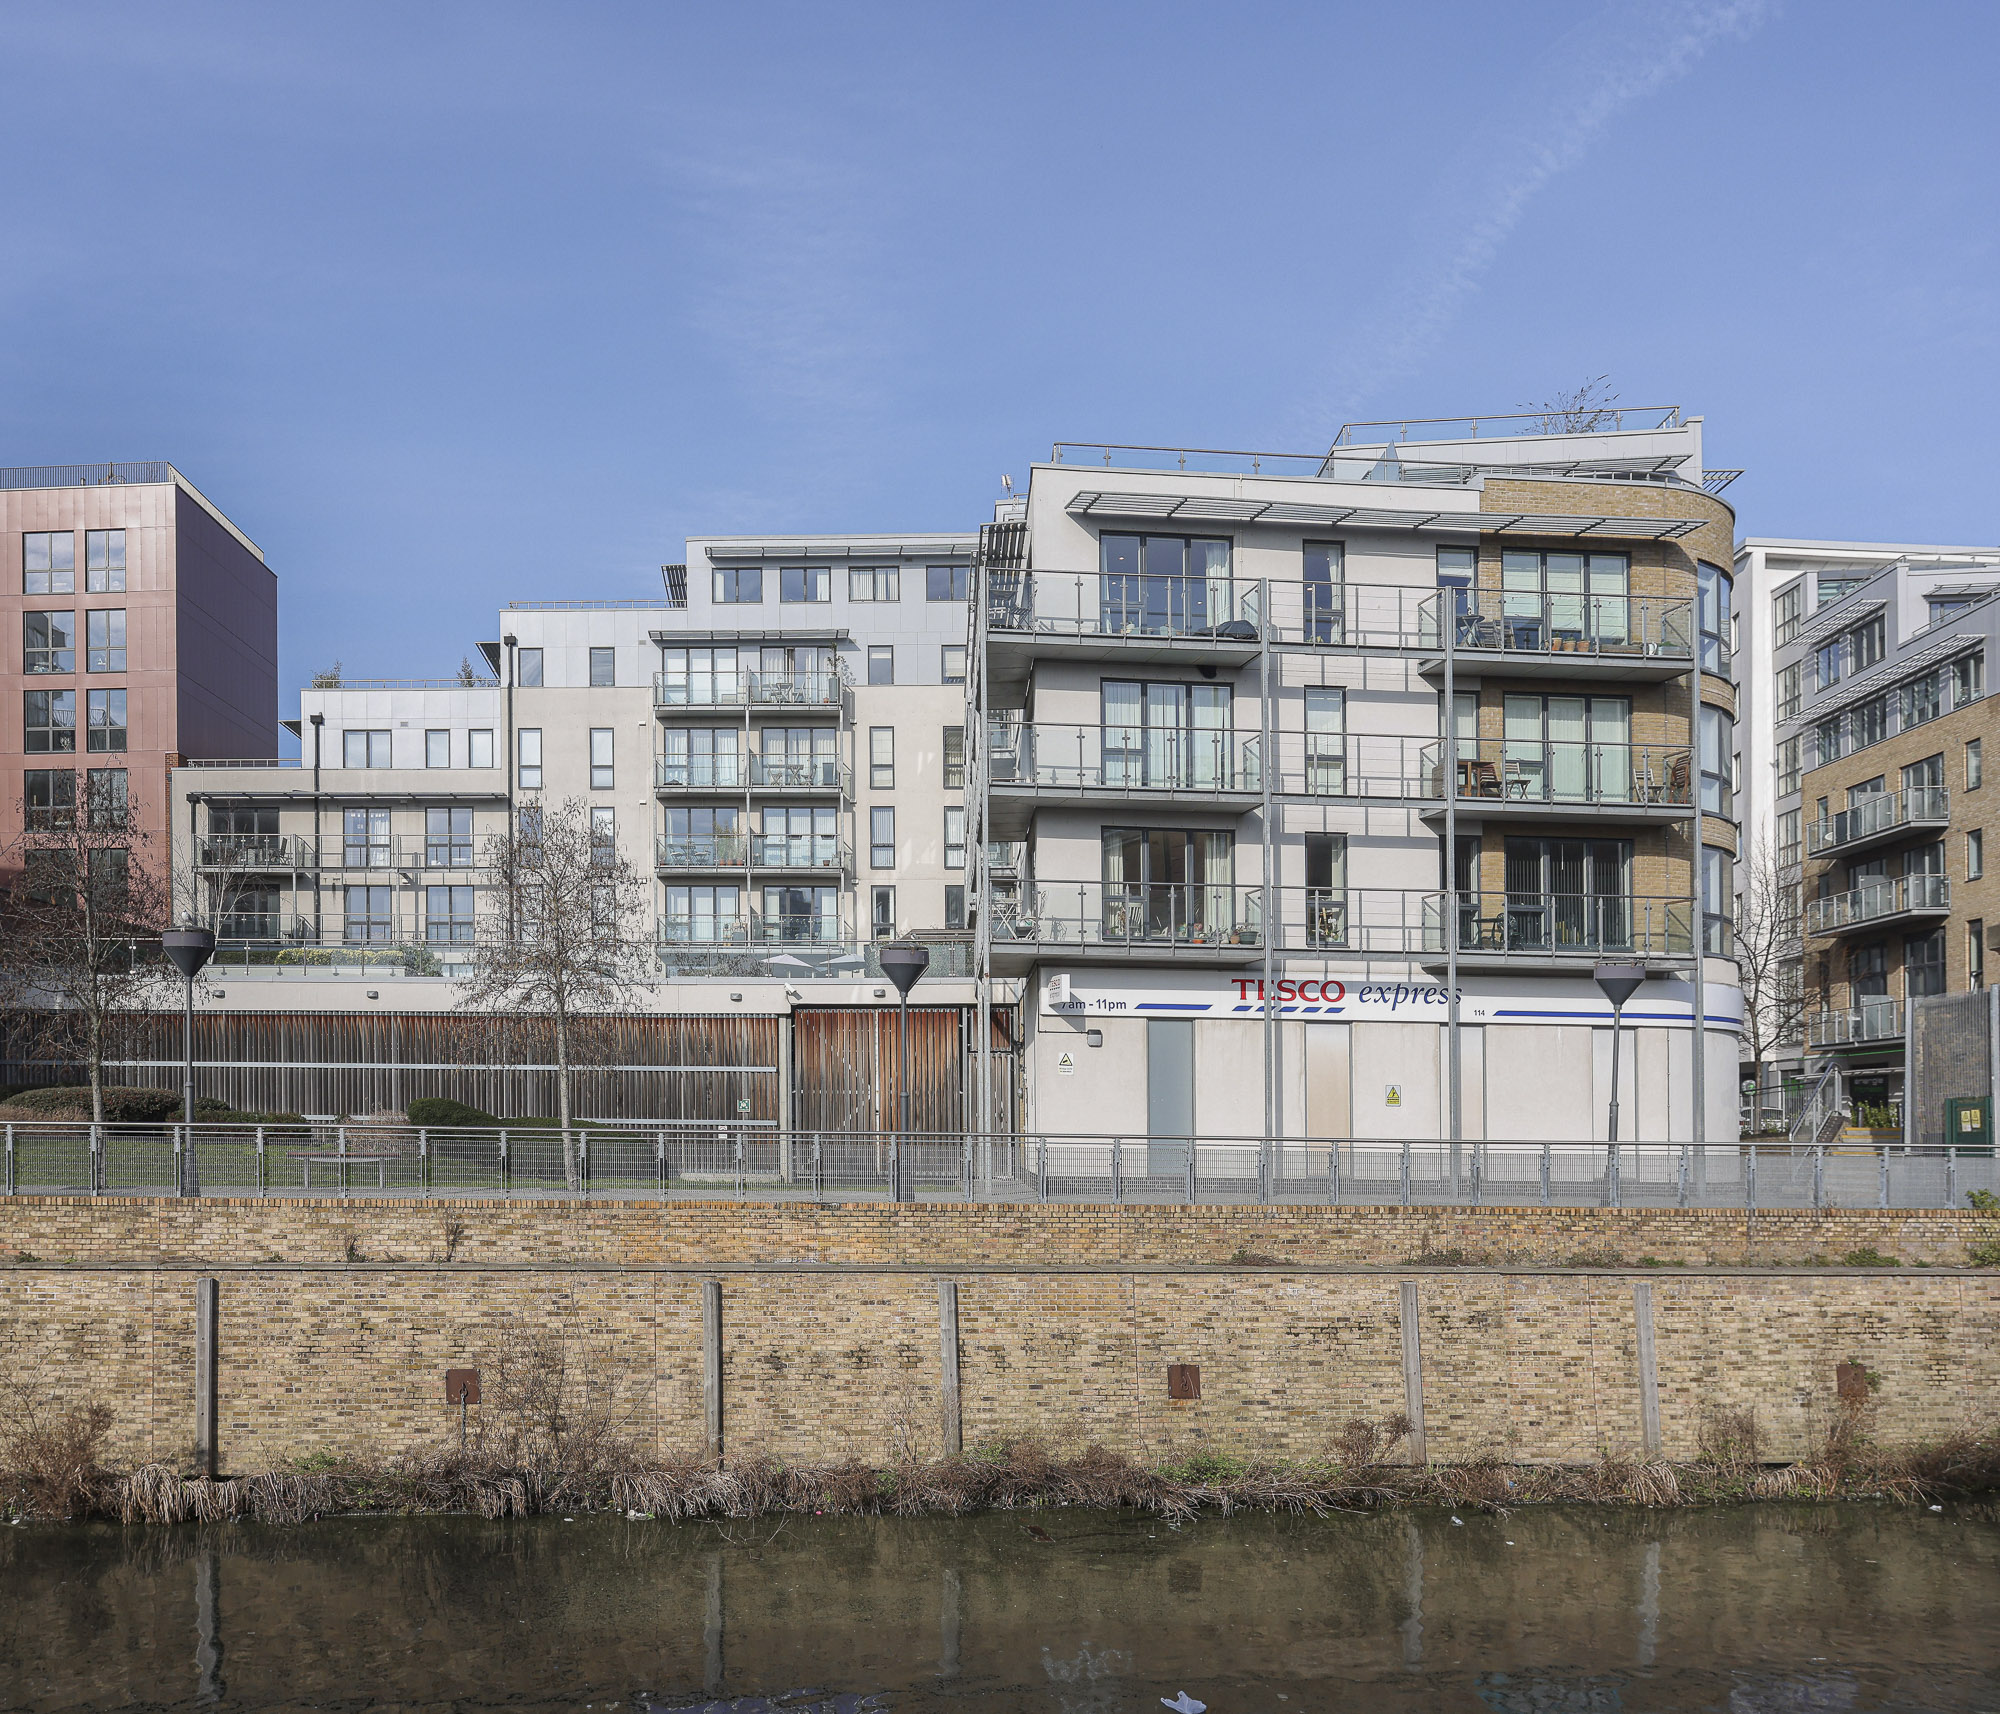 2 bedrooms apartments/flats to sale in Yeo Street, Bromley-By-Bow-image 17